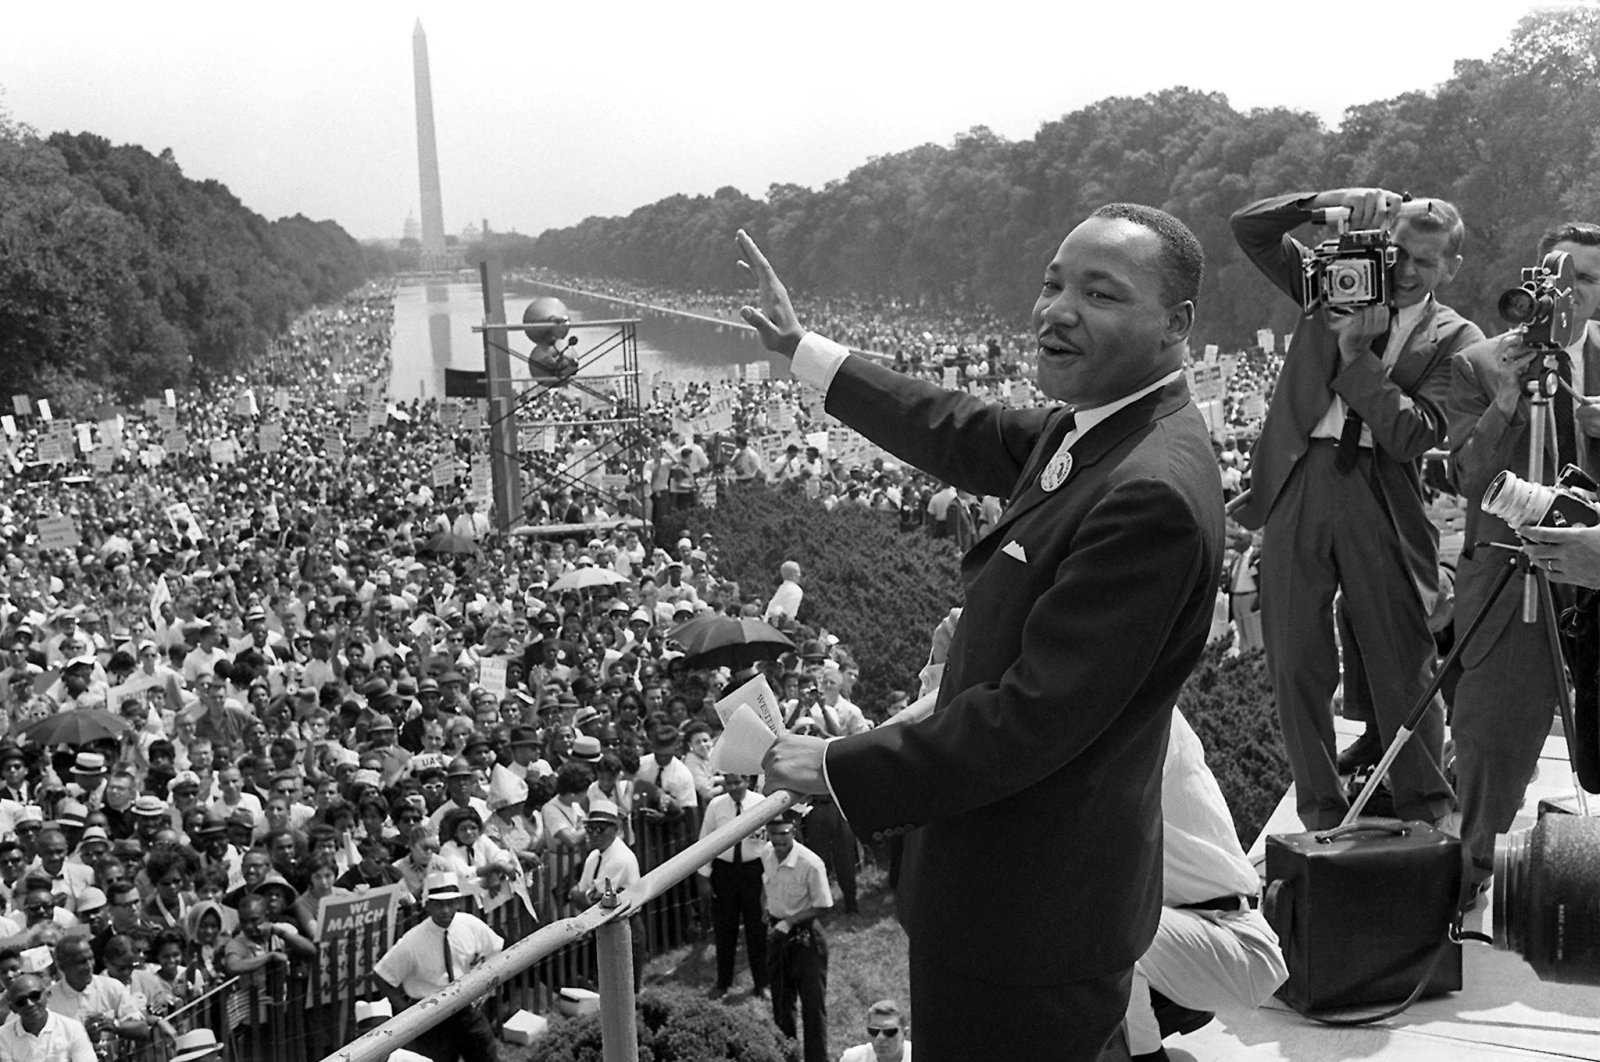 U.S. civil rights leader Martin Luther King Jr. (C) waves to supporters from the steps of the Lincoln Memorial during the March on Washington, Washington, U.S., Aug. 28, 1963. (AFP Photo)